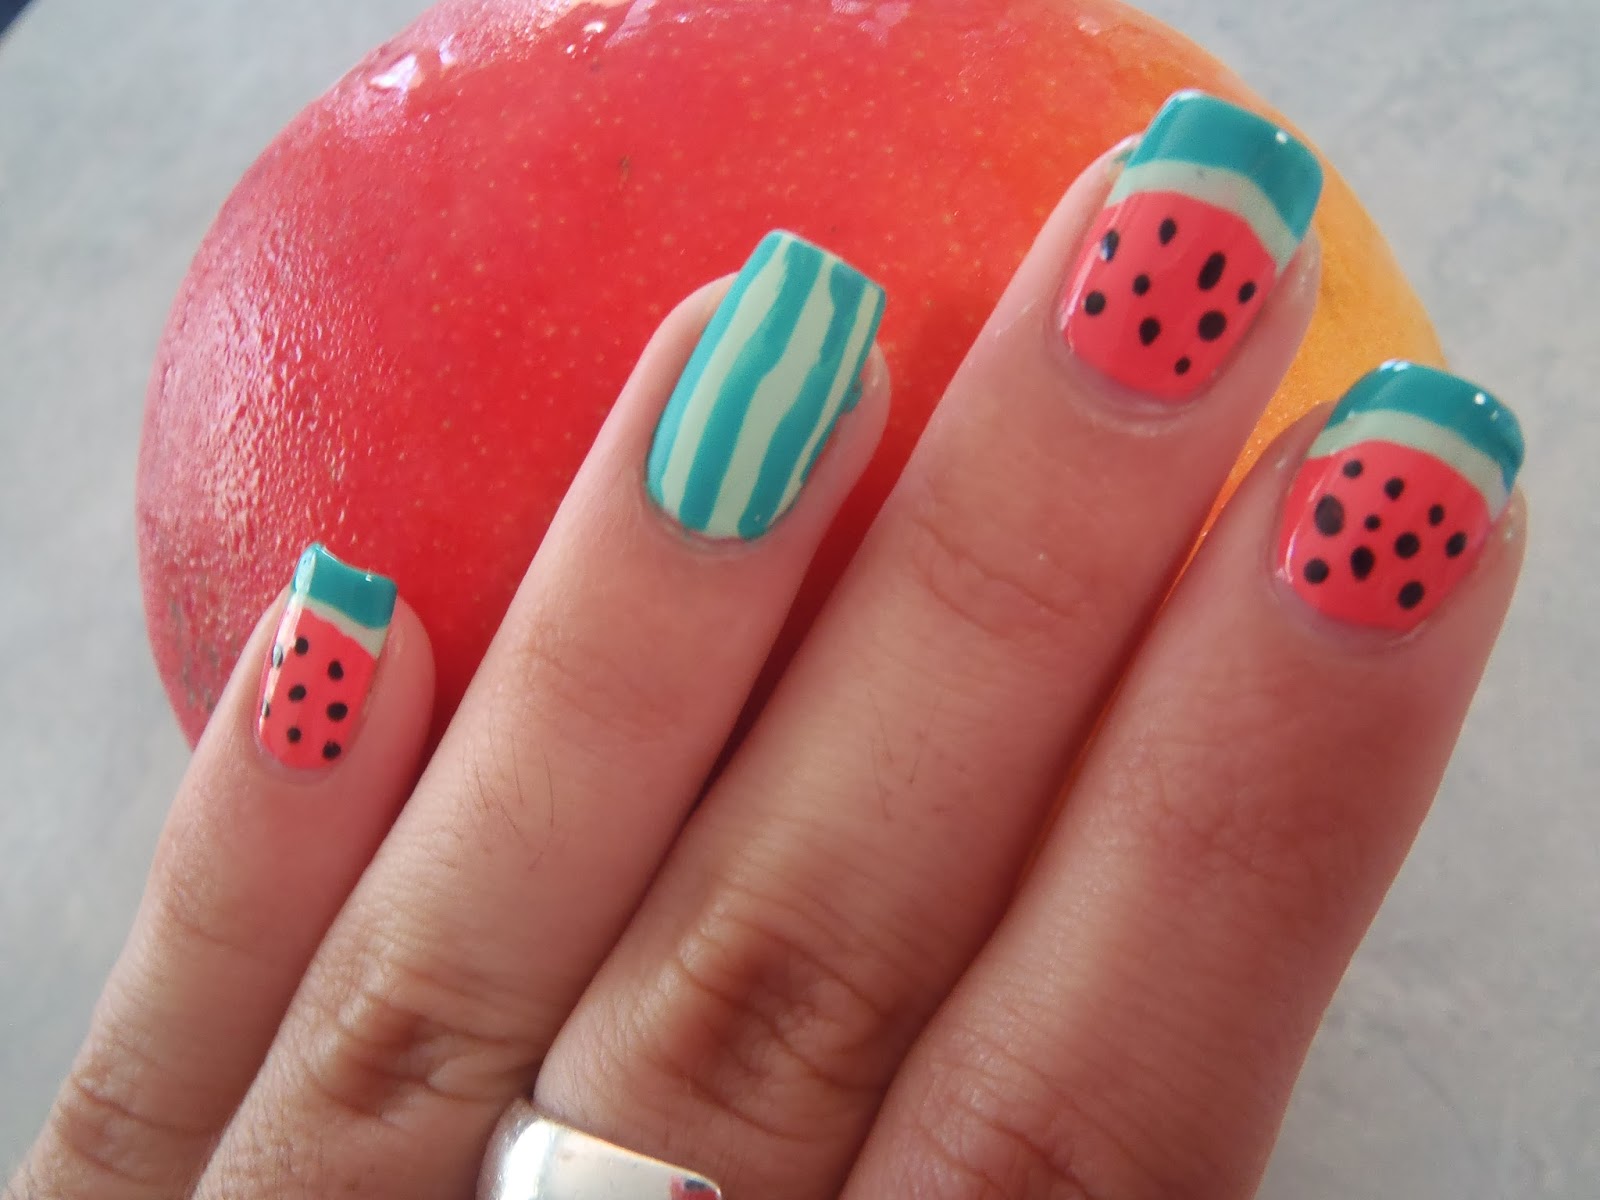 Watermelon Nail Art Designs for Short Nails - wide 3